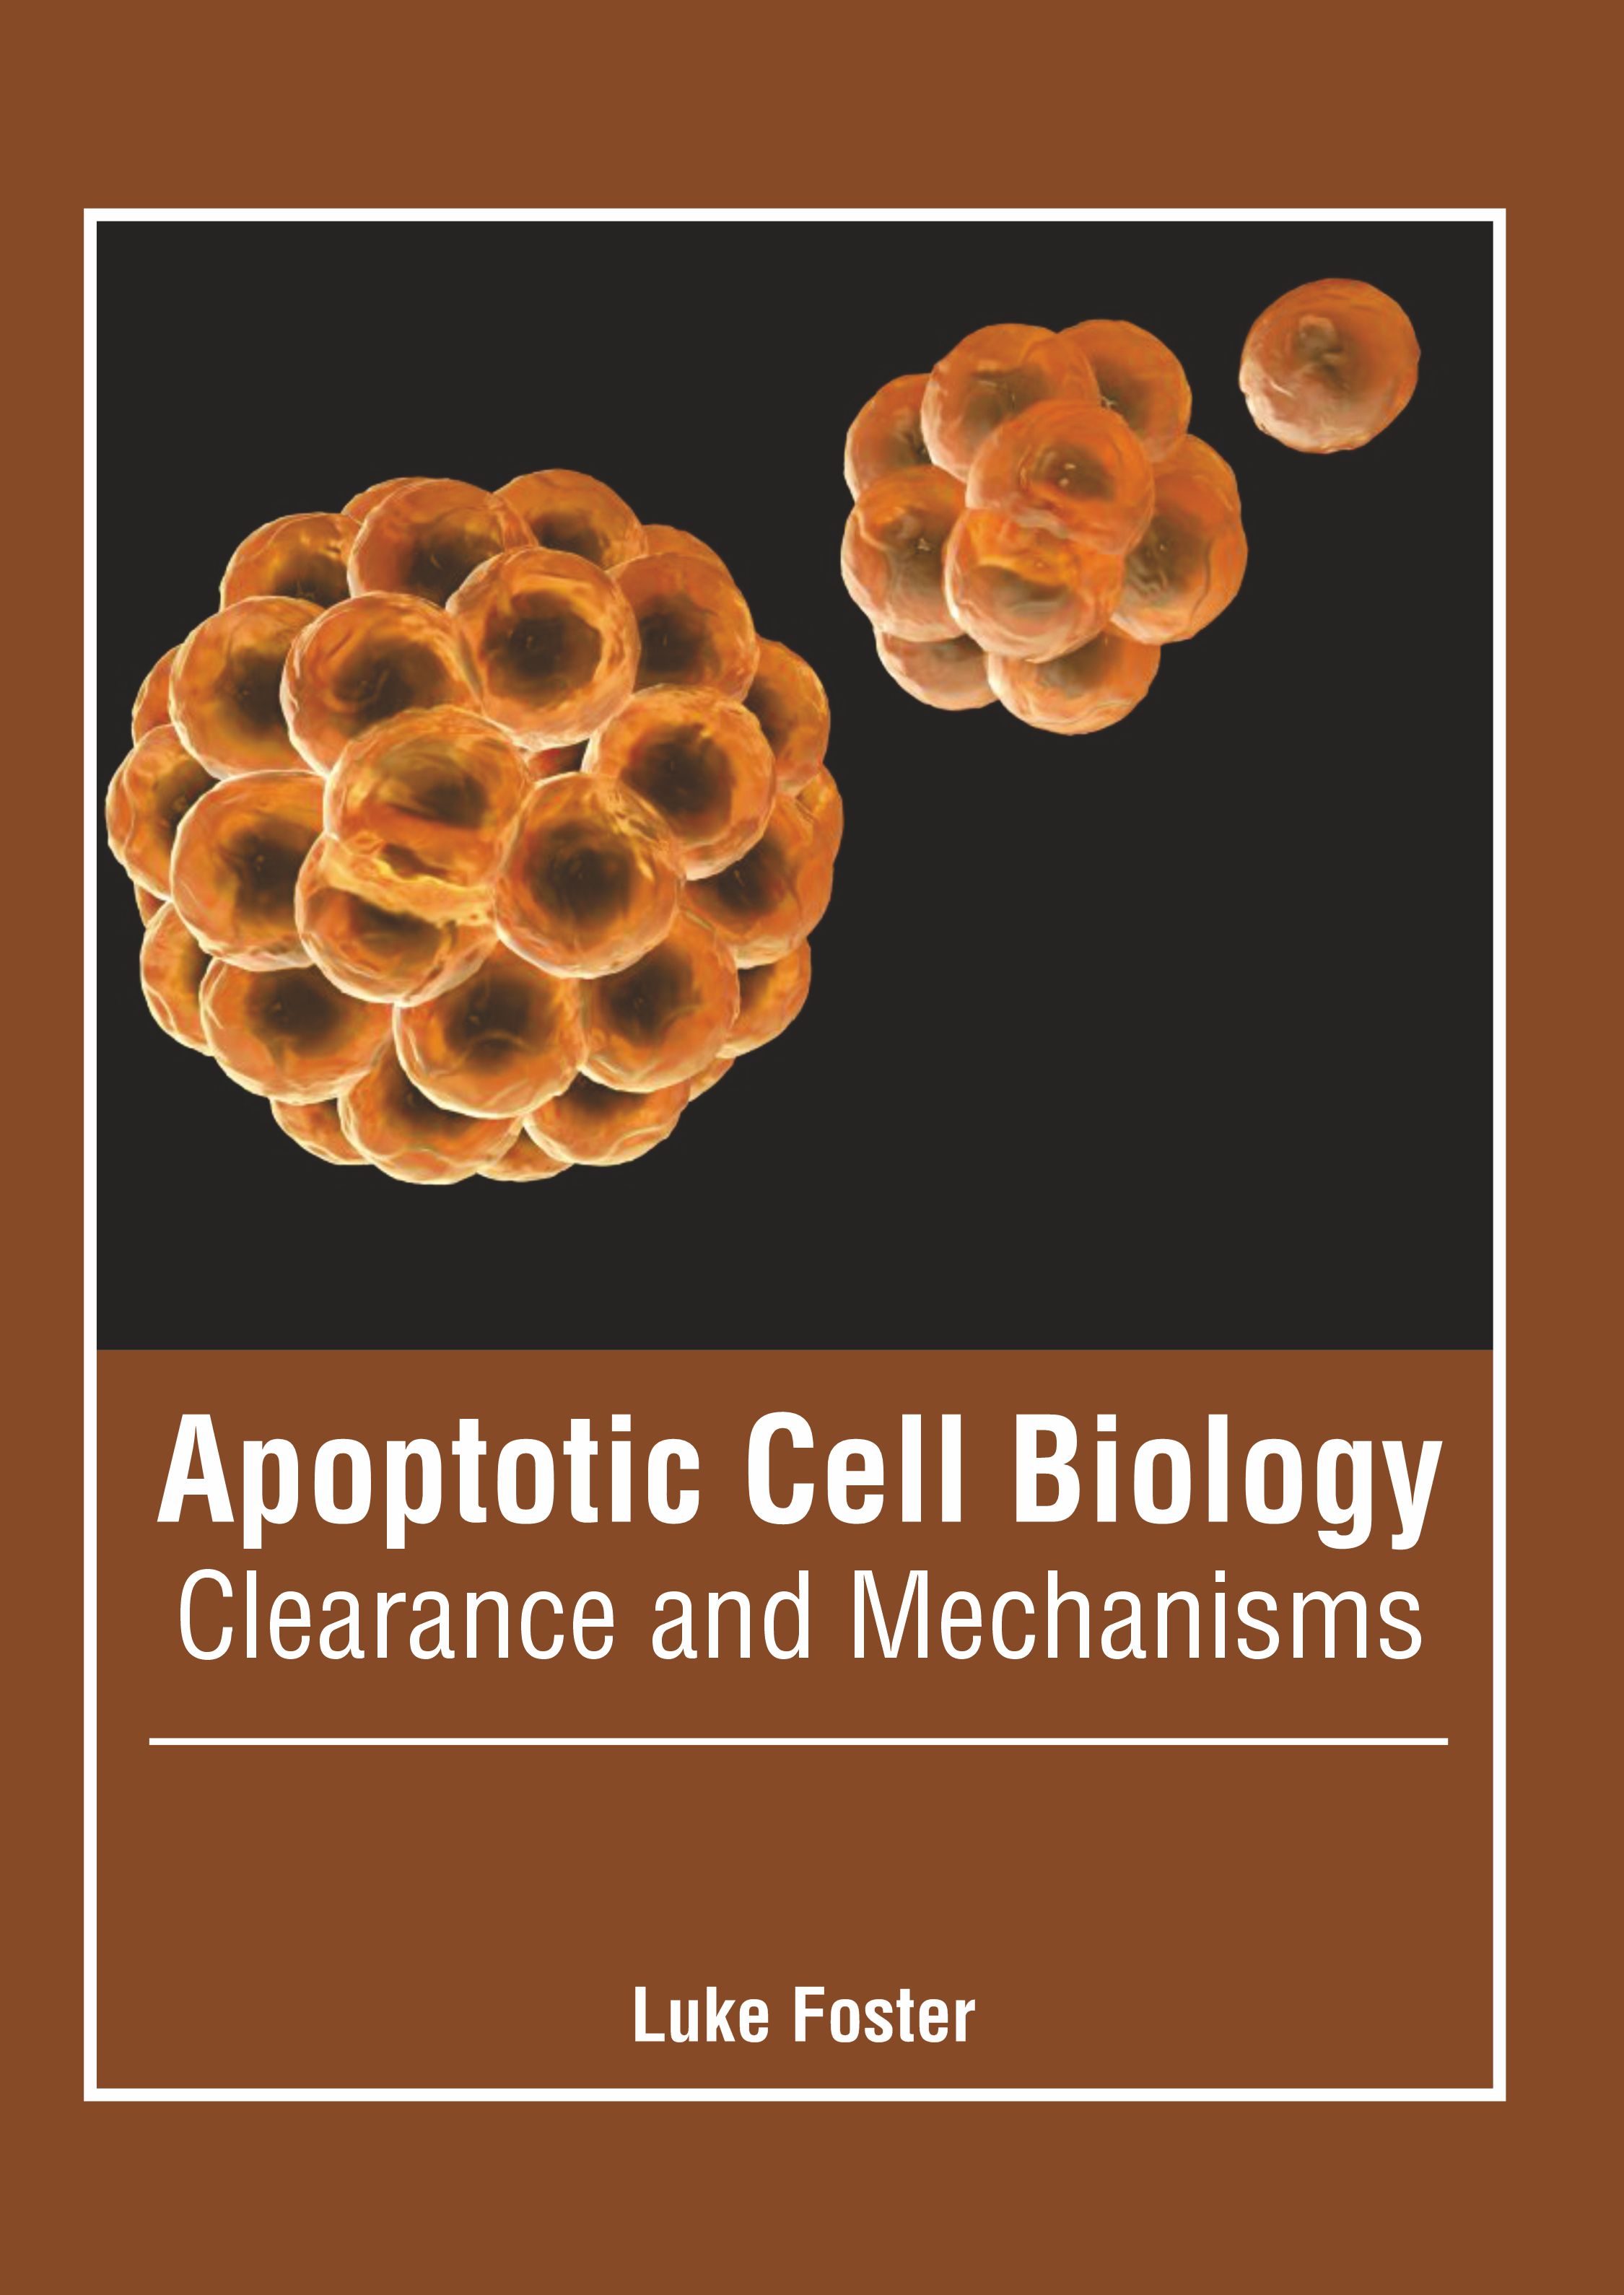 

exclusive-publishers/american-medical-publishers/apoptotic-cell-biology-clearance-and-mechanisms-9781639270415